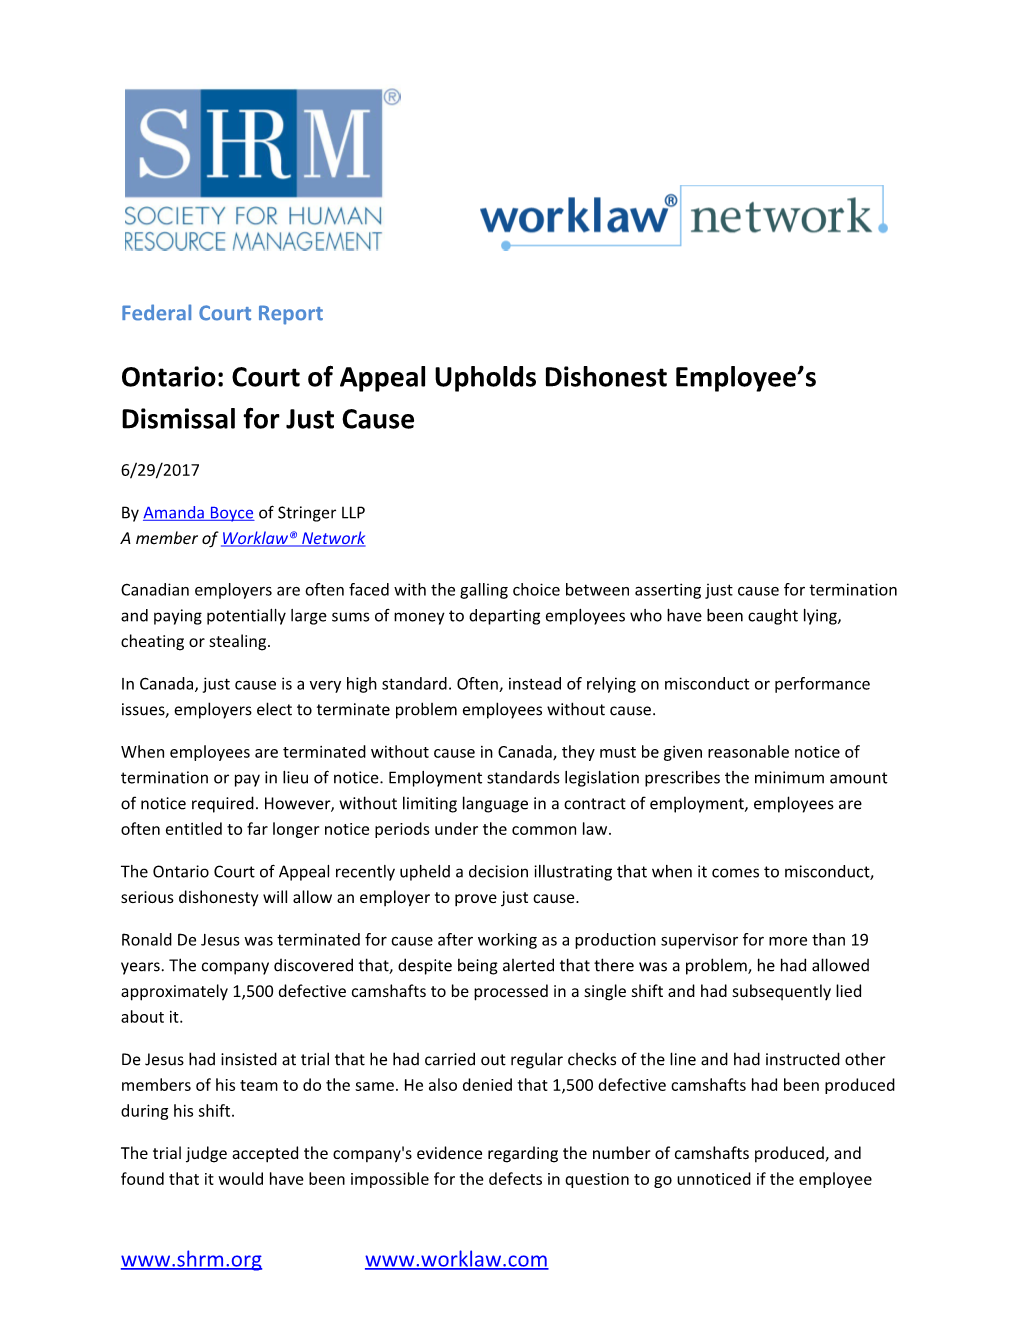 Federal Court Report Ontario: Court of Appeal Upholds Dishonest Employee S Dismissal For